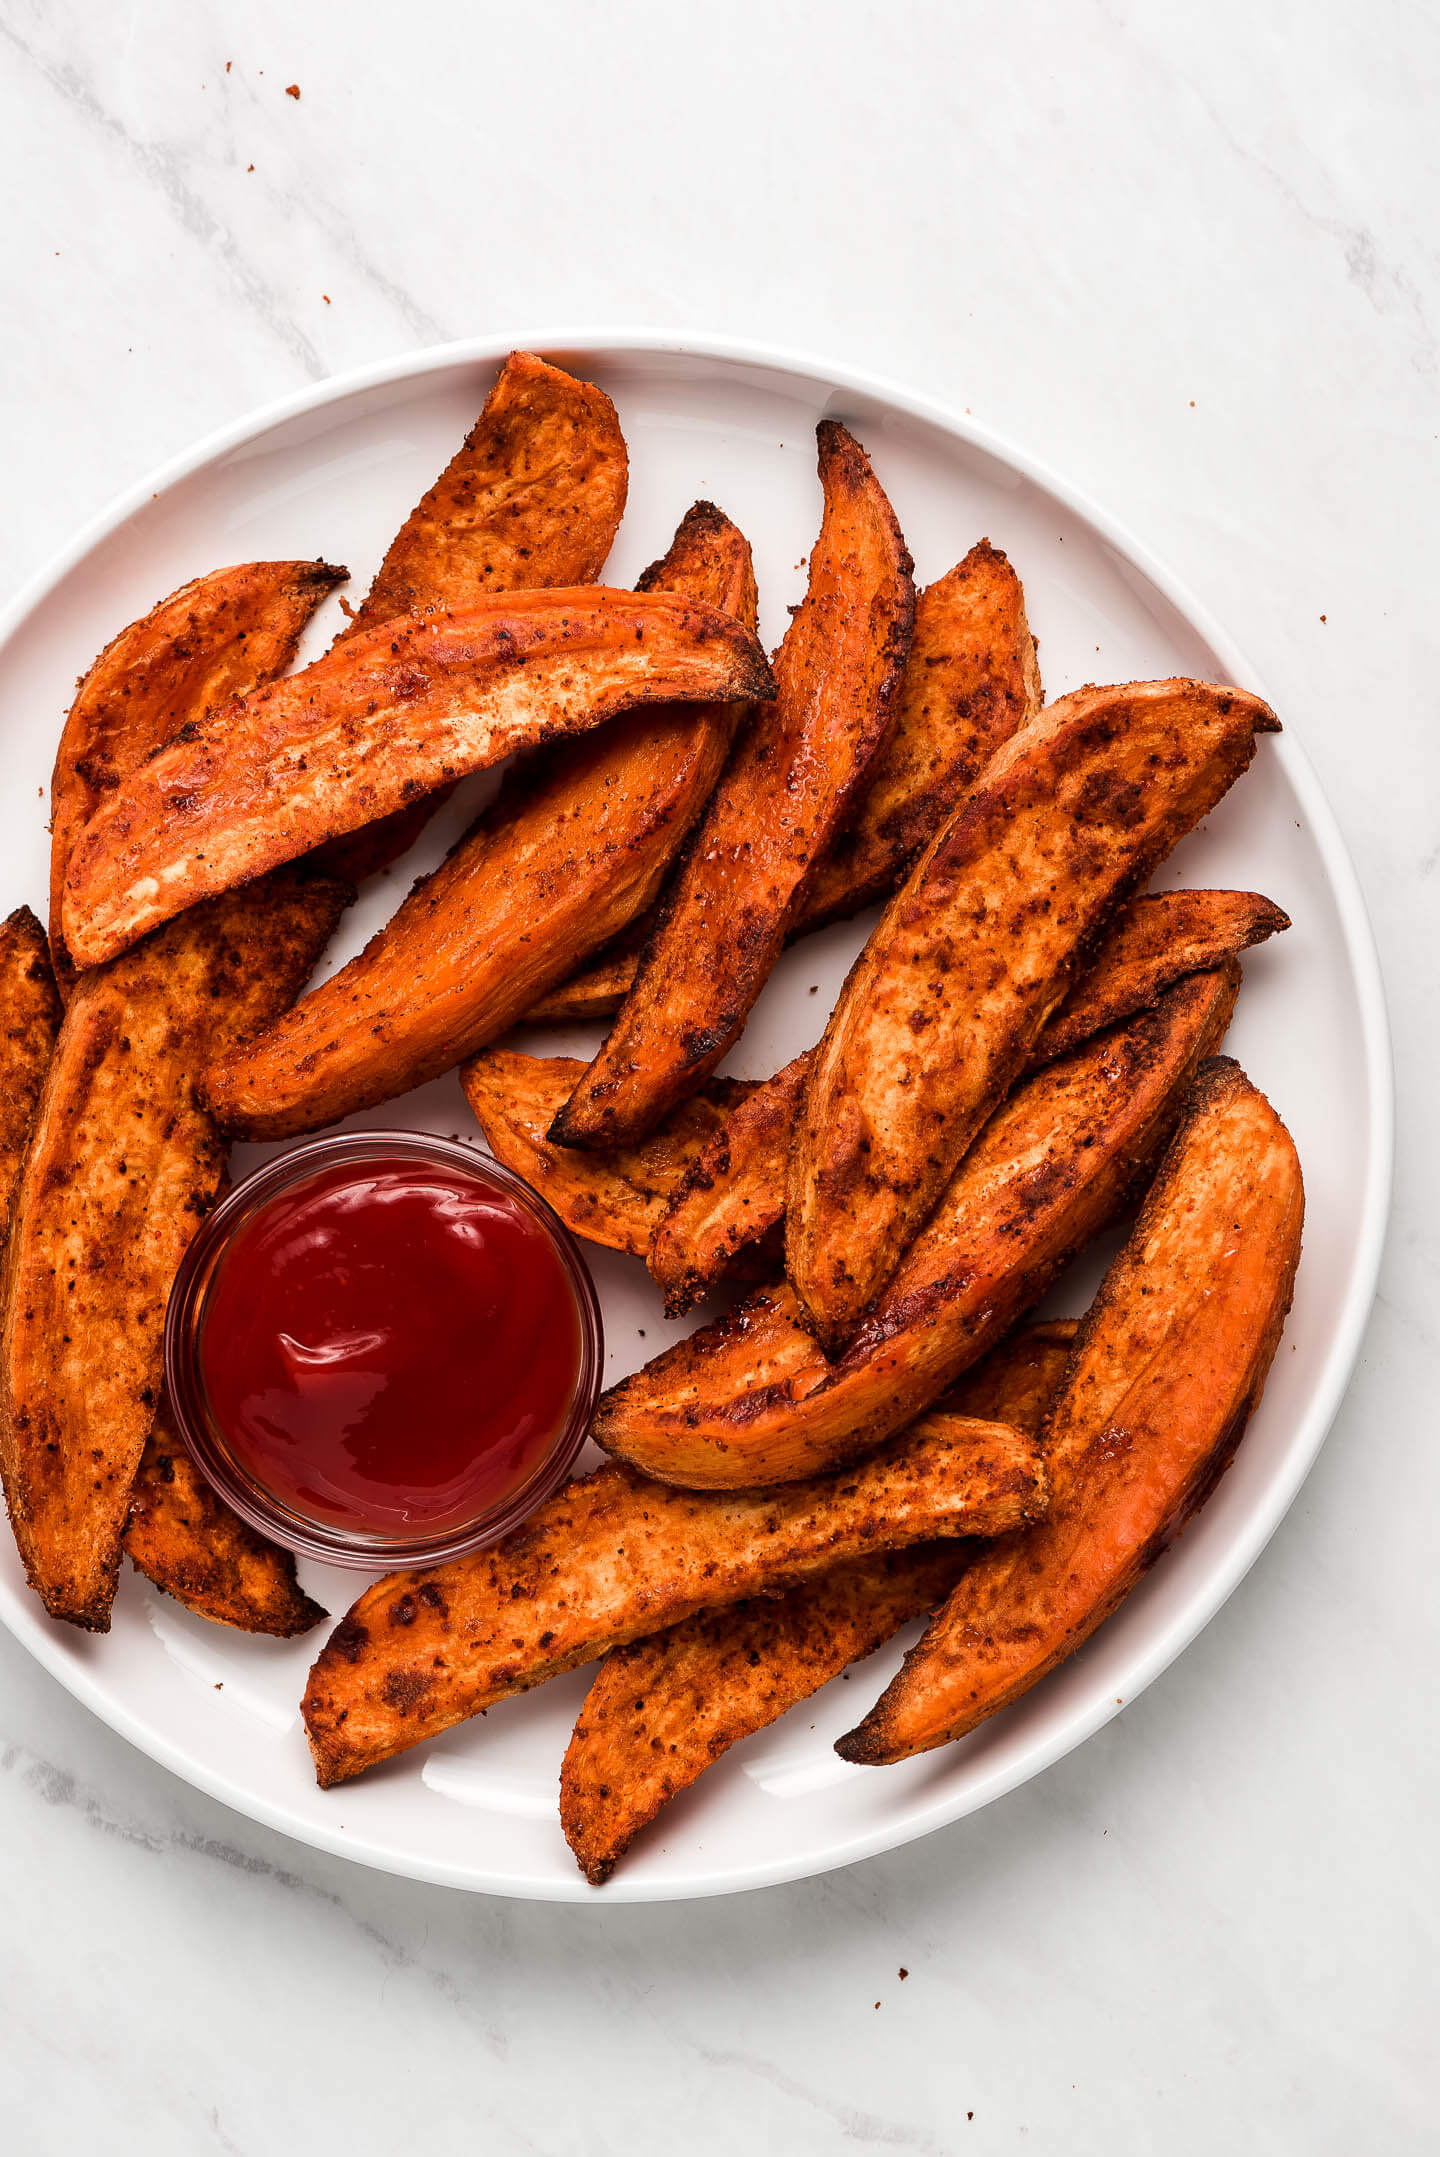 Roasted Sweet Potato Wedges on a plate.